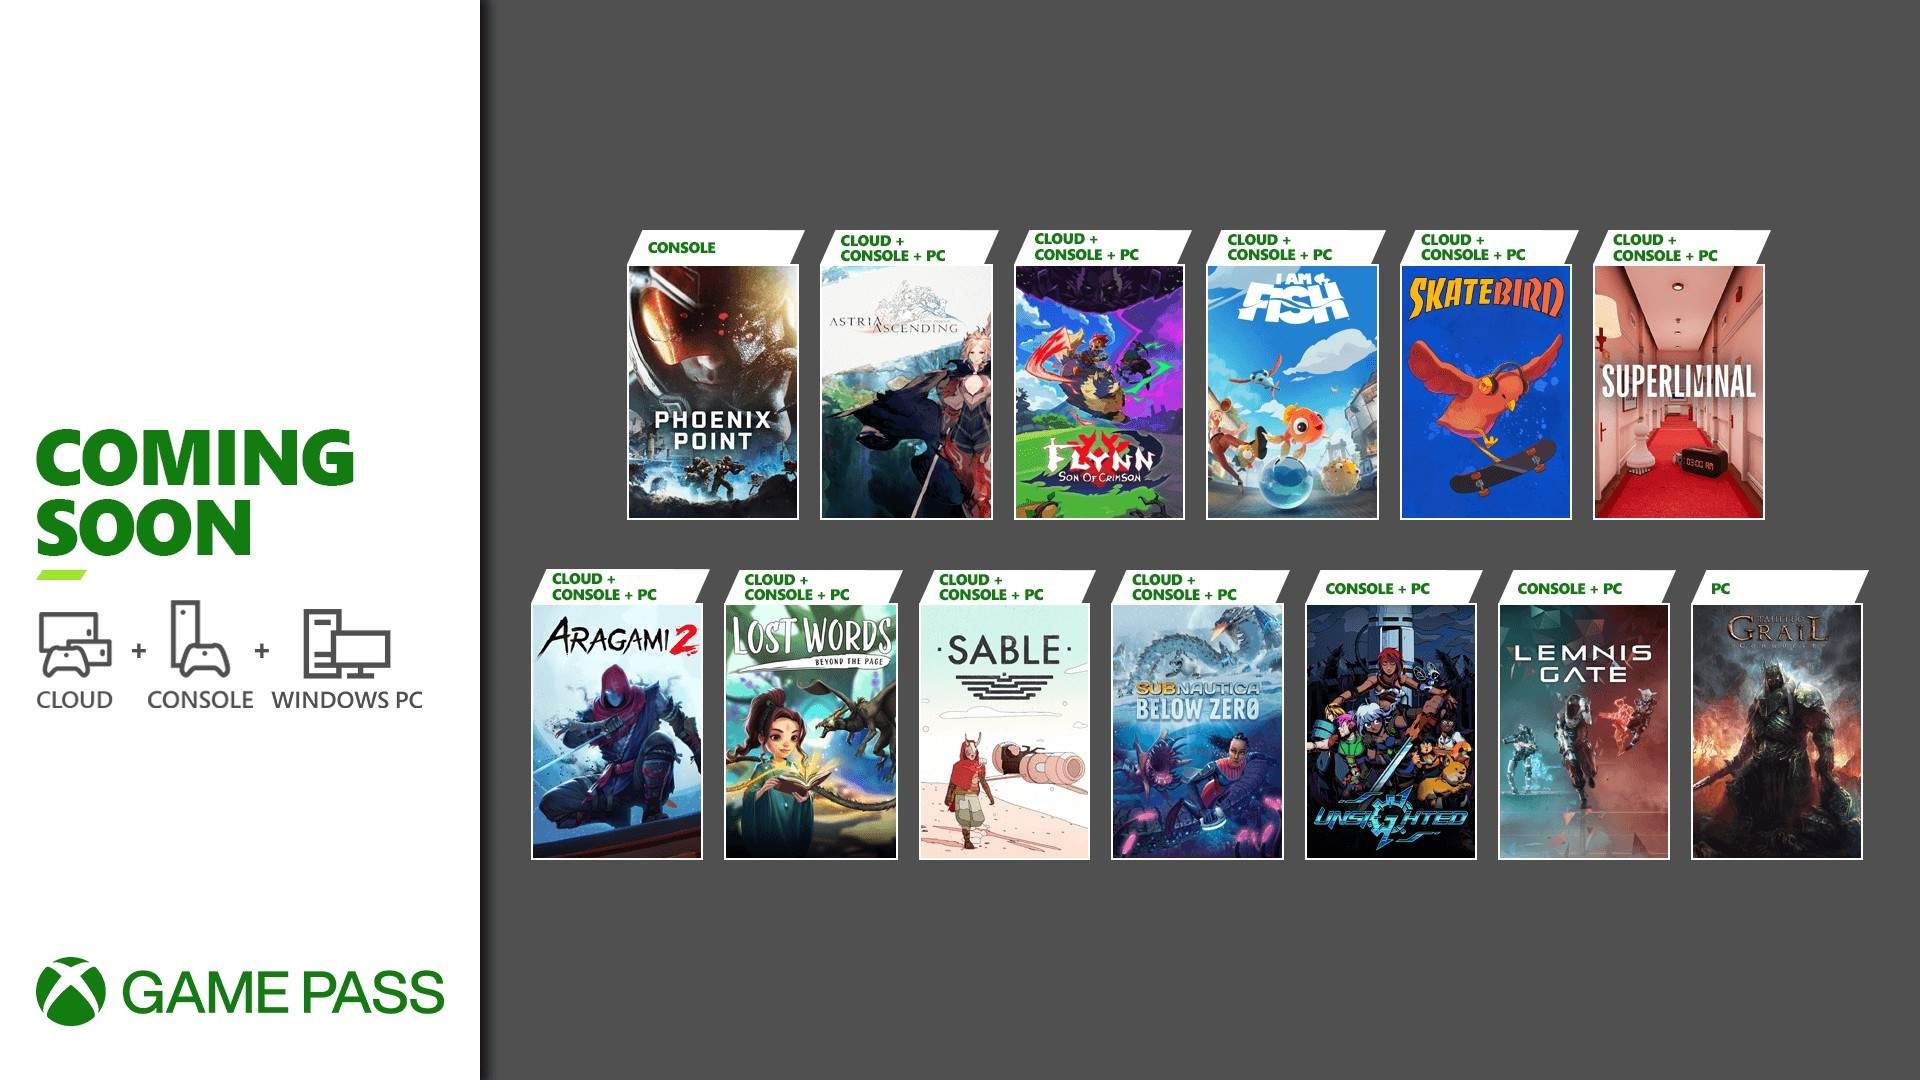 Xbox Game Pass on X: here to clear up rumors that these games are